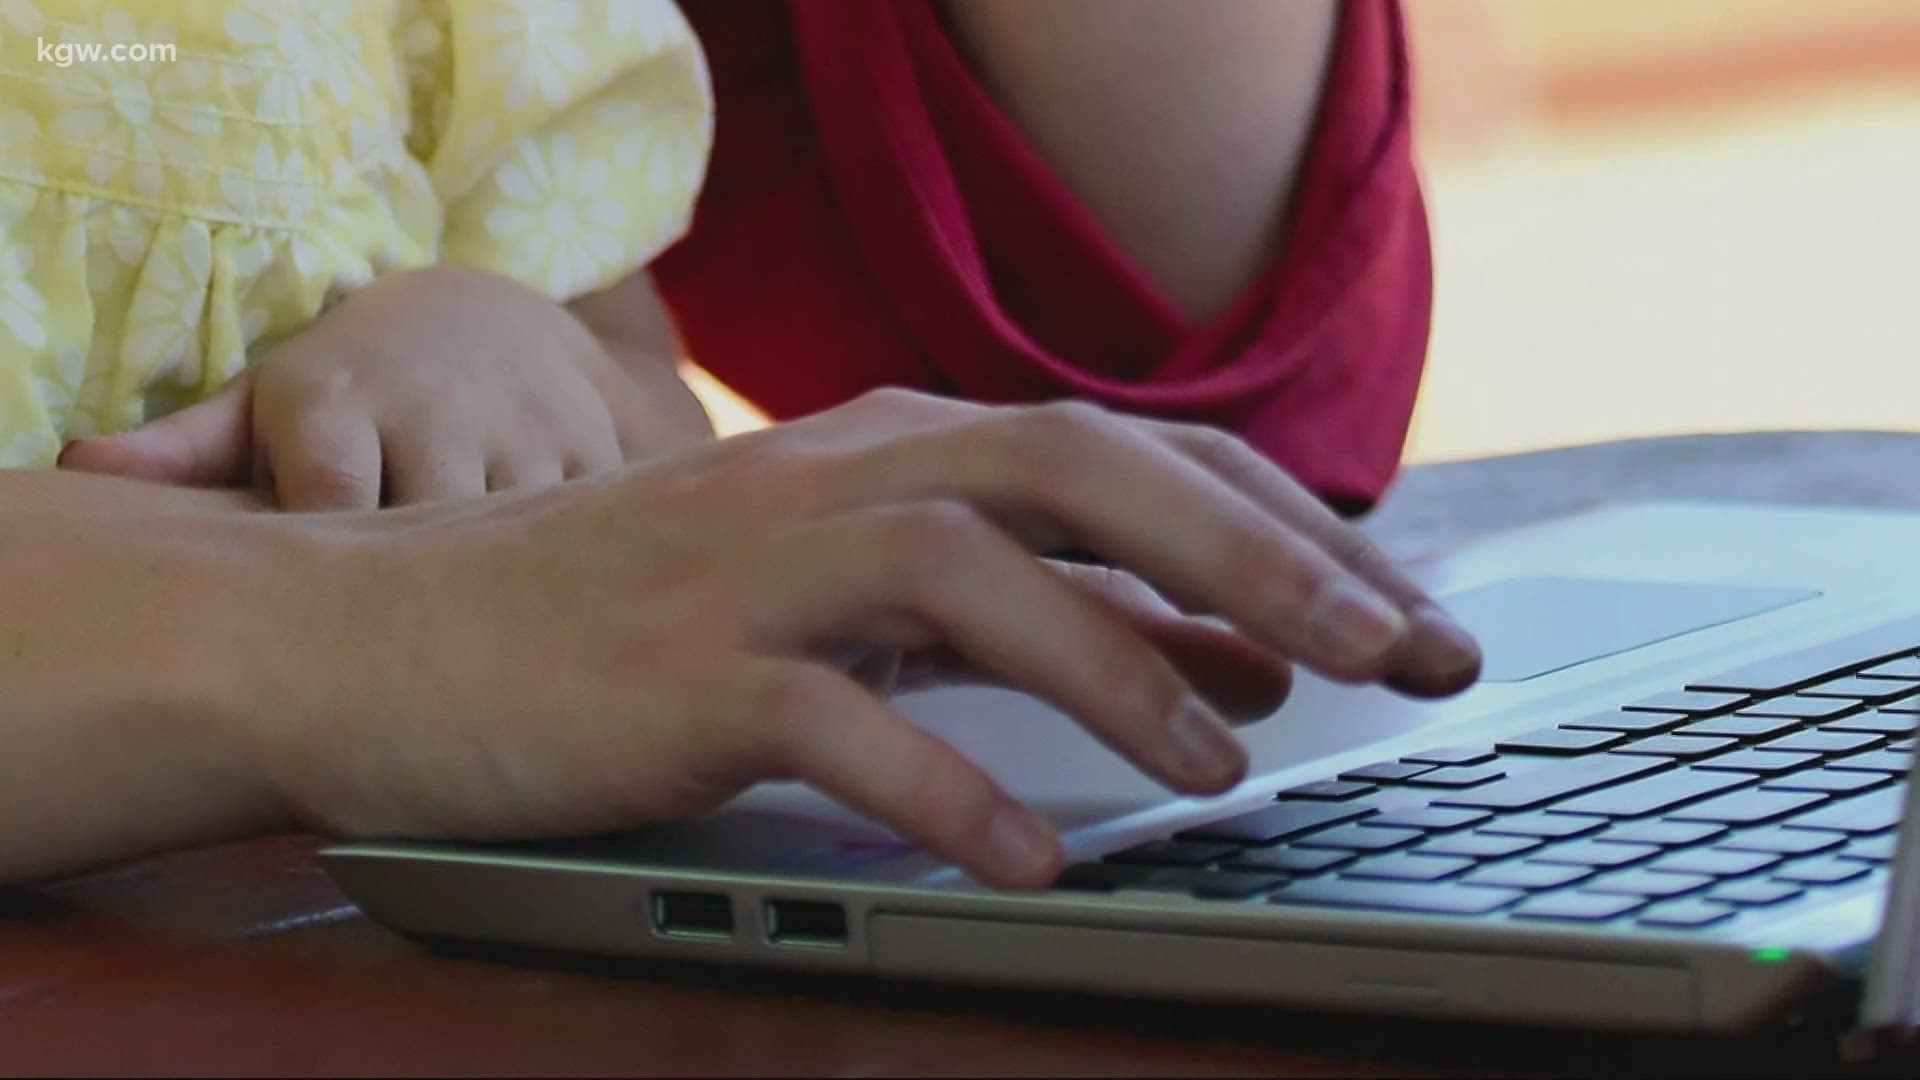 Parents wonder why district didn’t give a way to monitor what their child is doing online.